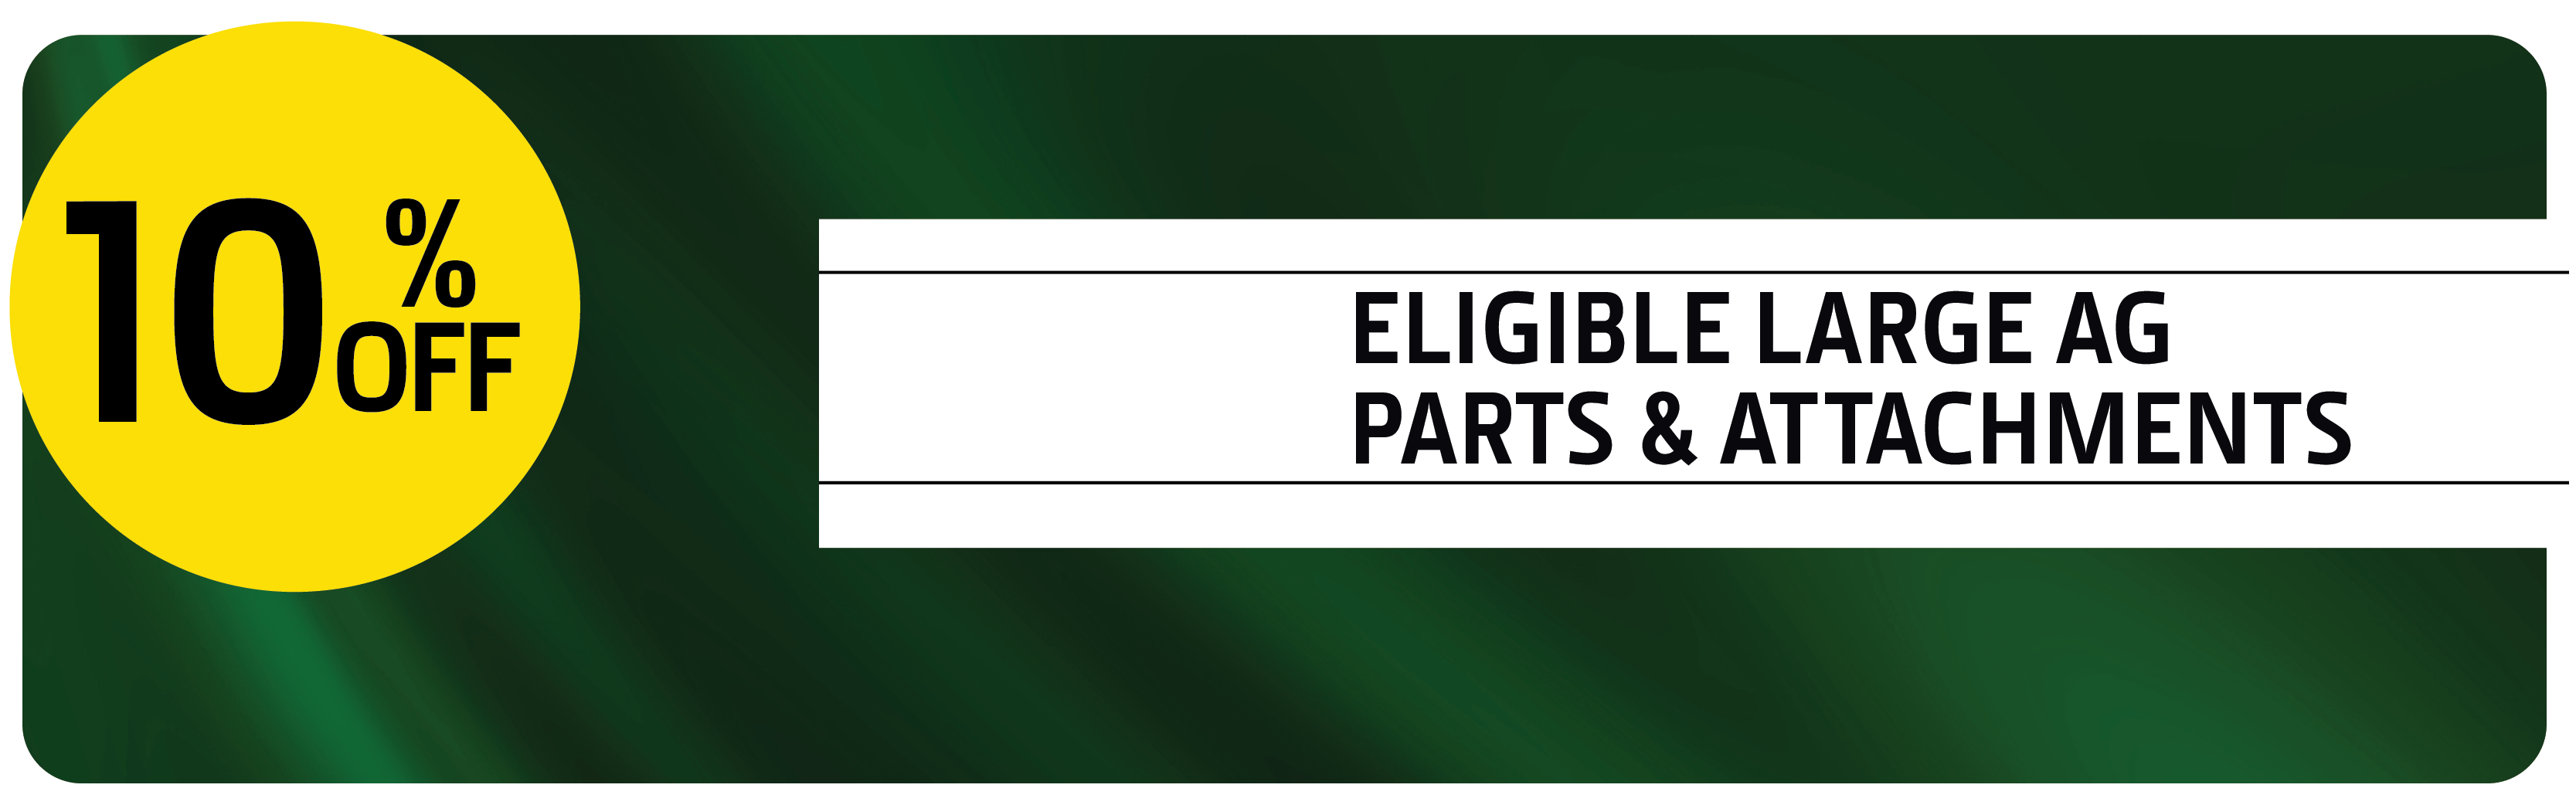 10% Off Eligible Large Ag Parts & Attachments